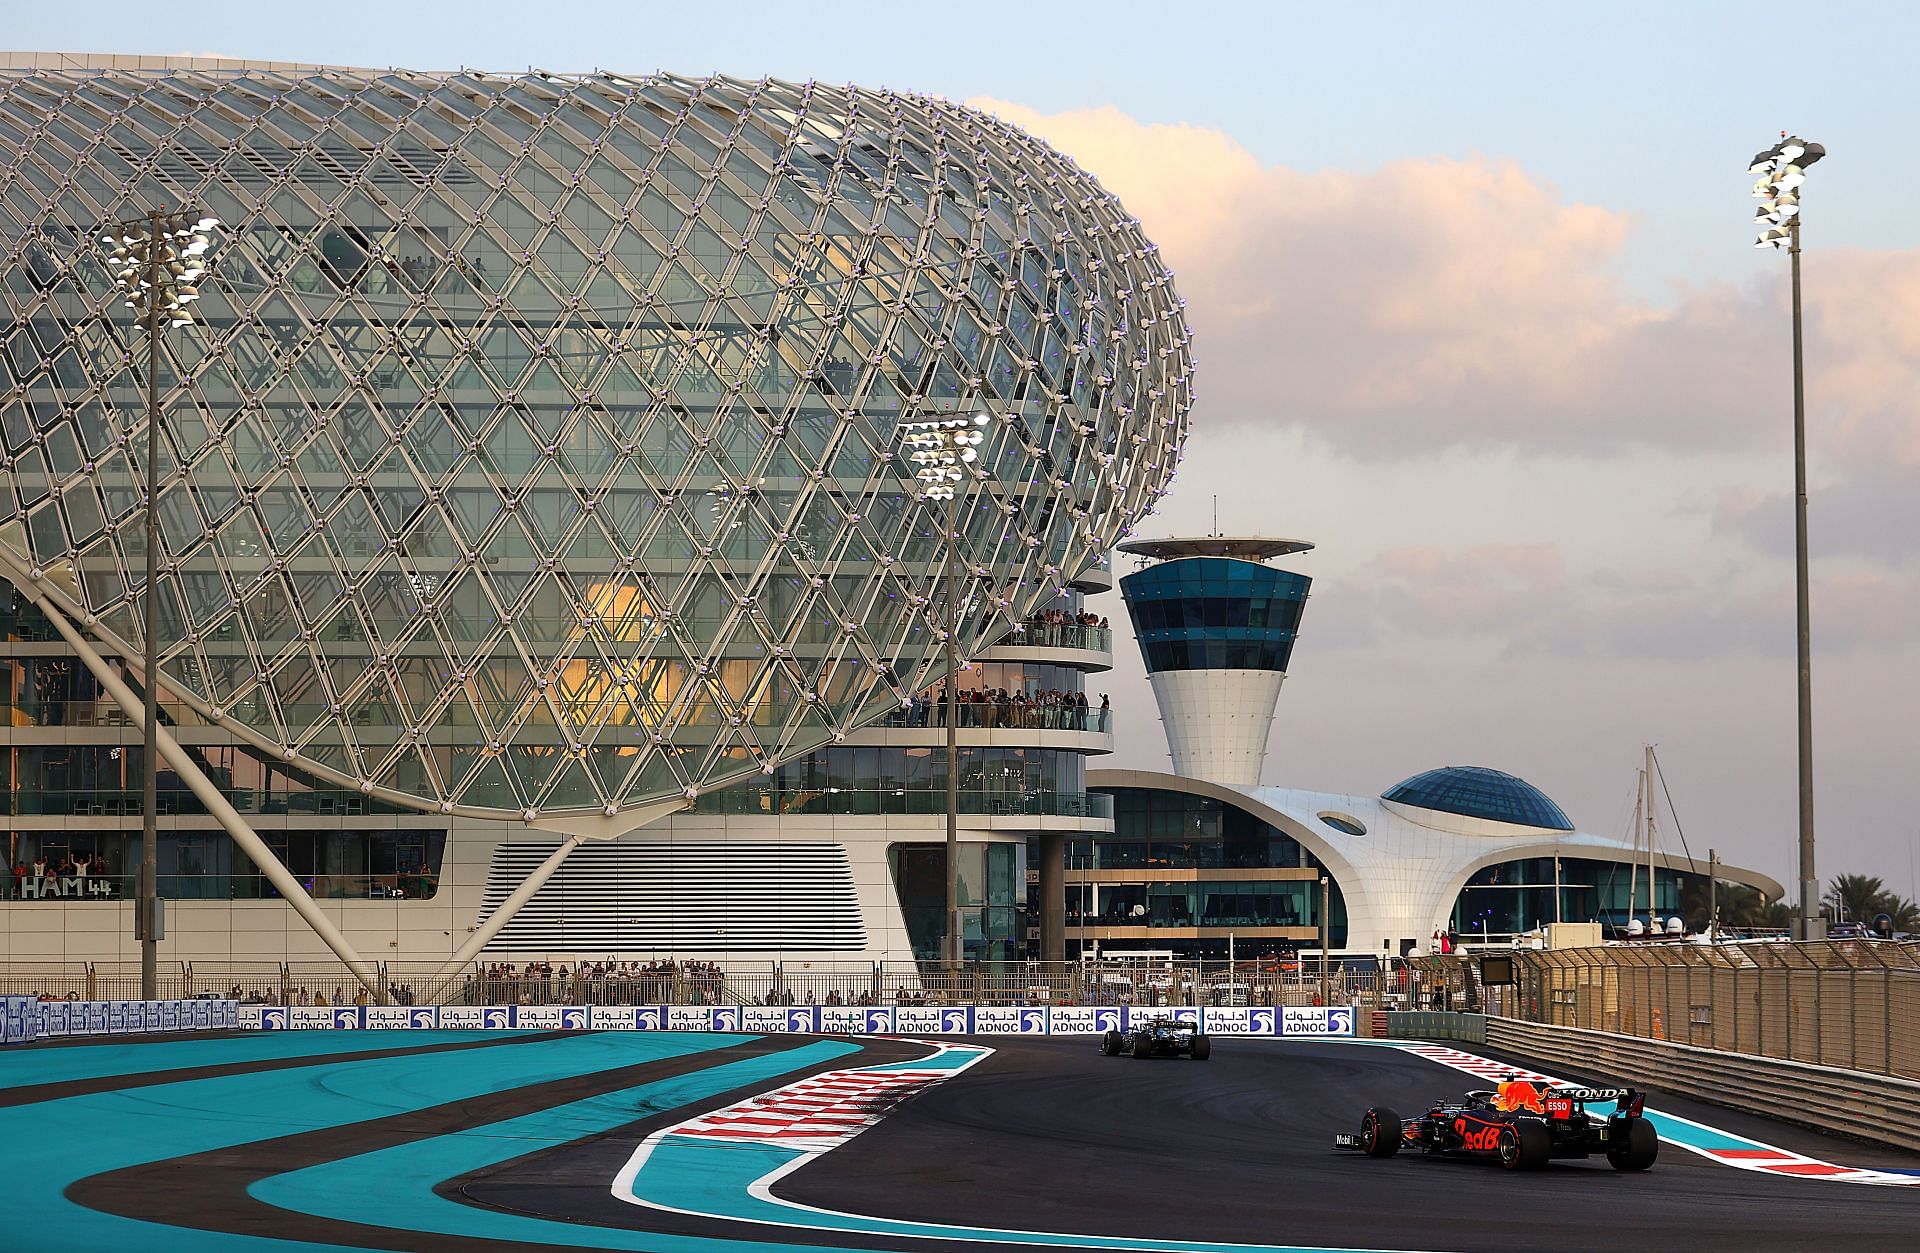 F1 Grand Prix of Abu Dhabi - Max Verstappen chases down Lewis Hamilton (Photo by Bryn Lennon/Getty Images)